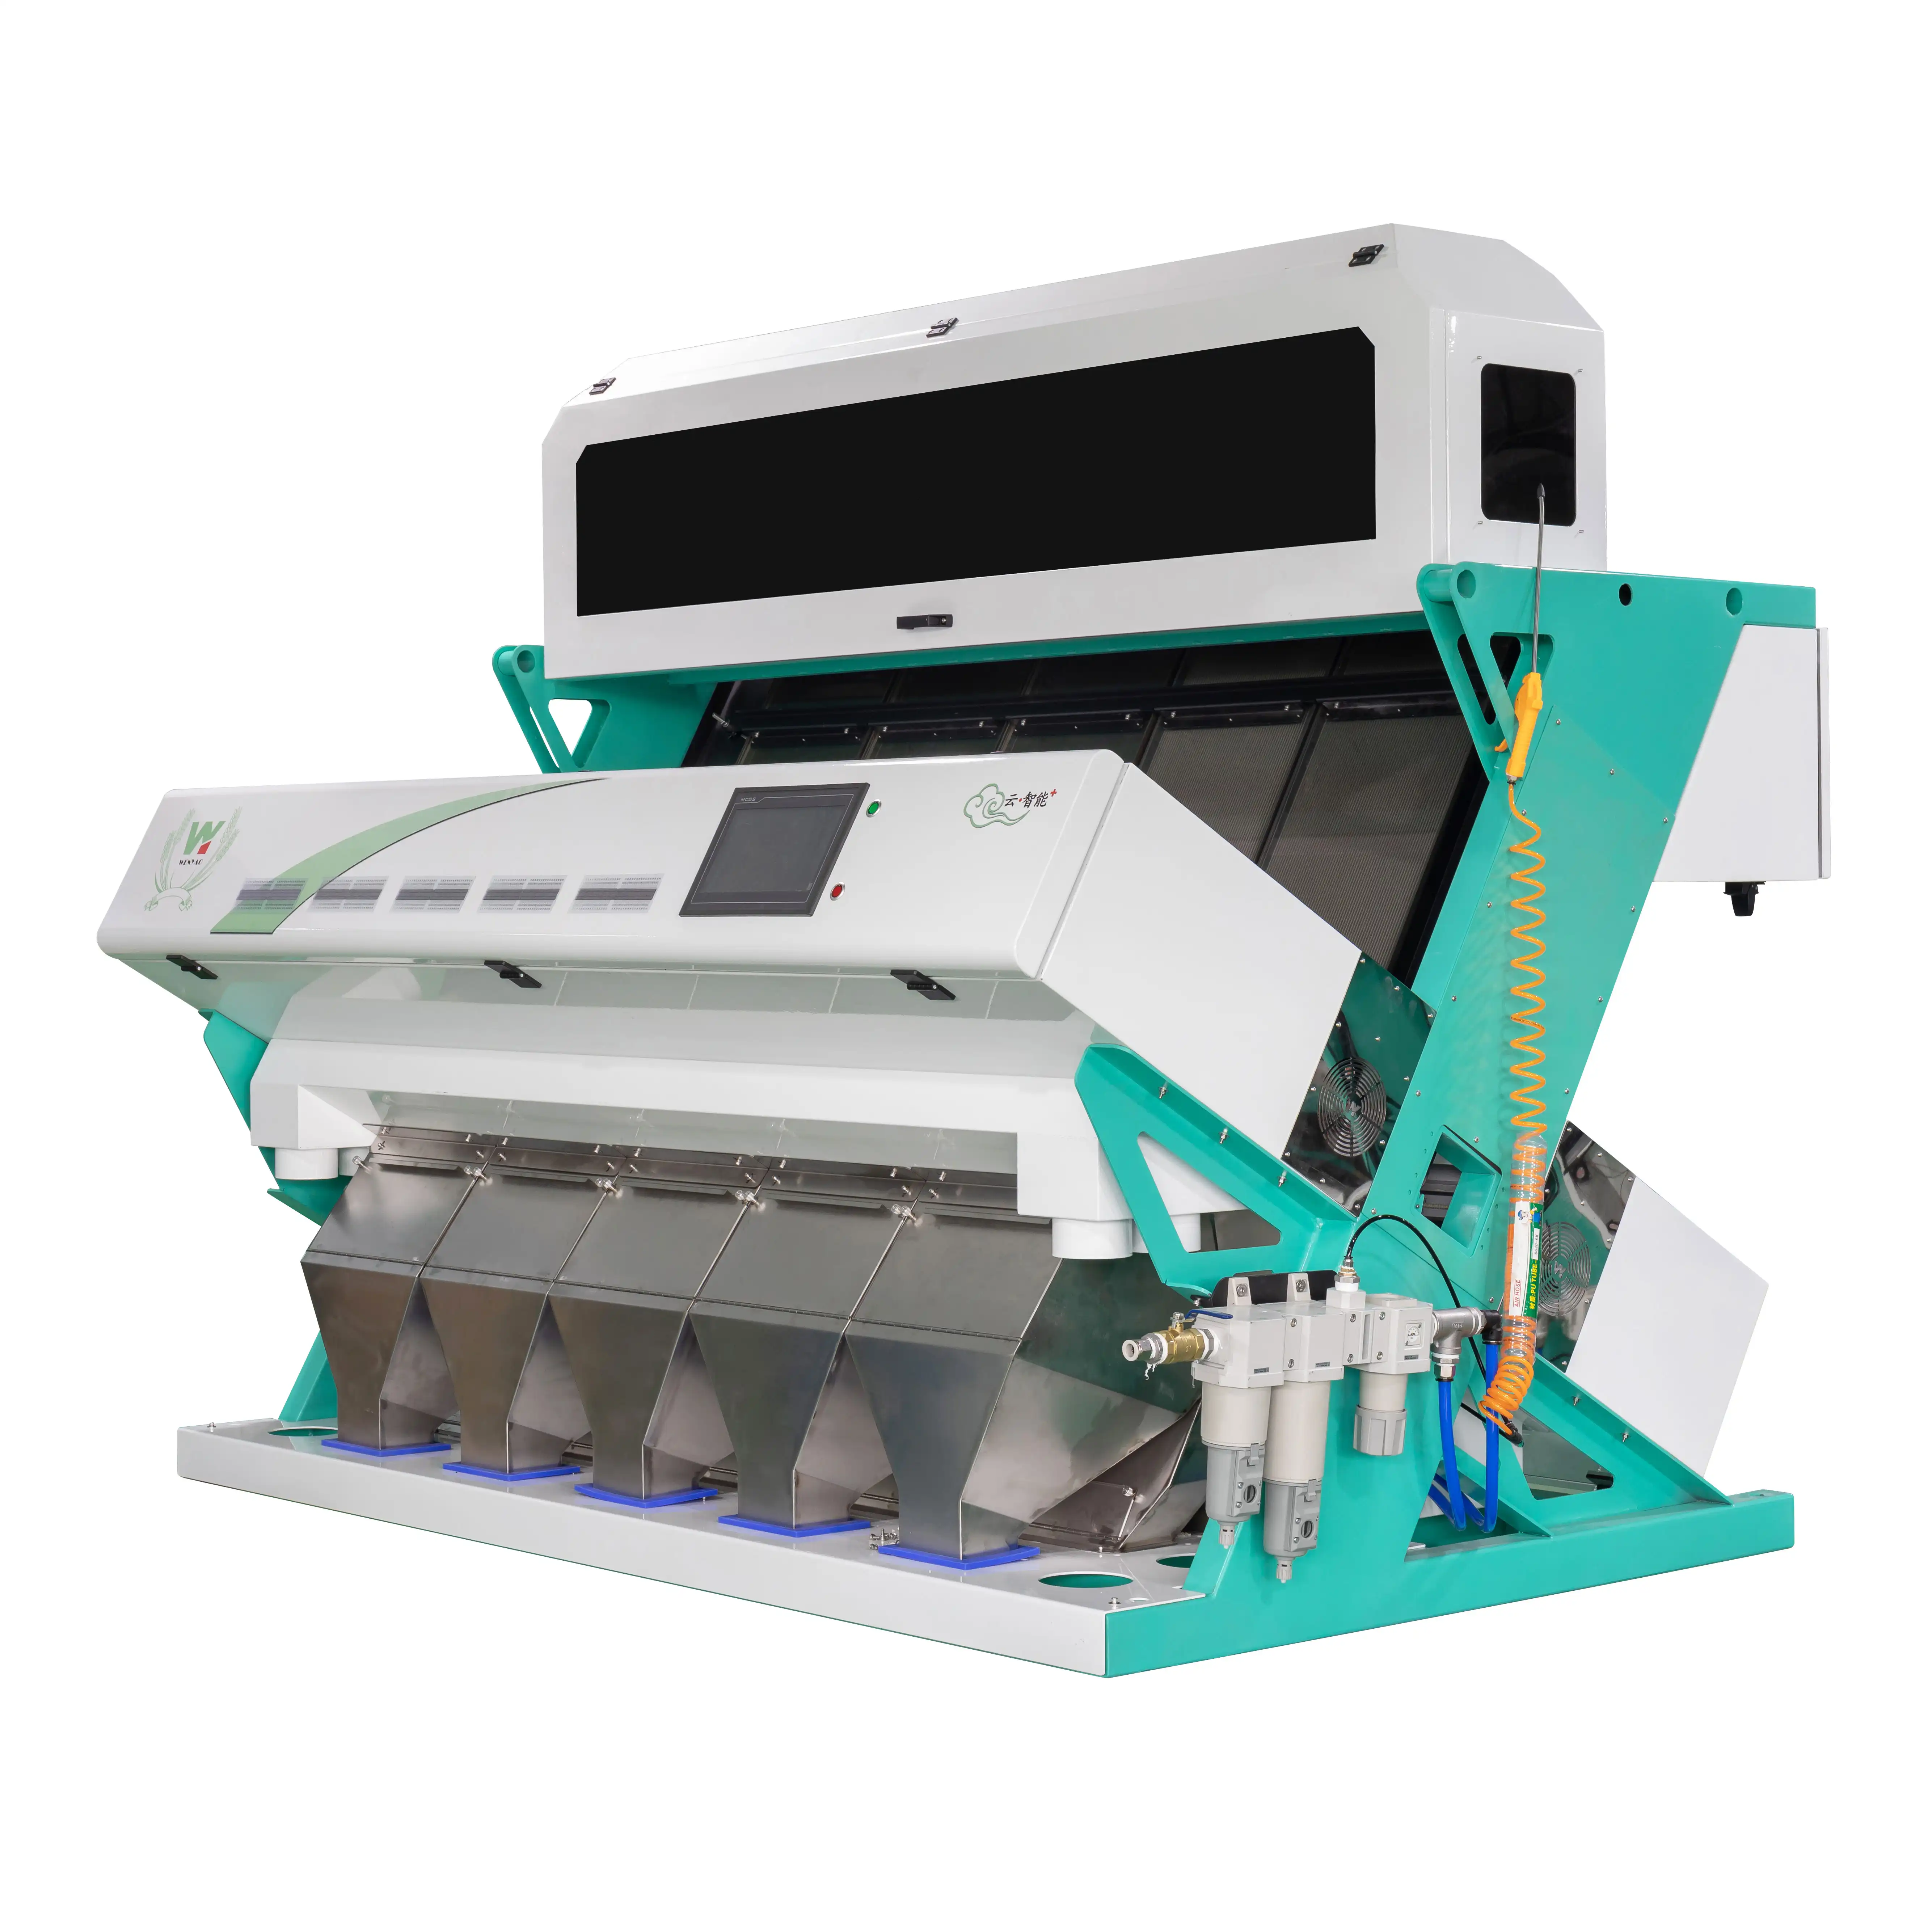 Intelligent Color Sorter Multifunction color sorter/grain/beans/seeds/plastic sorter with CCD camera and 320 channels